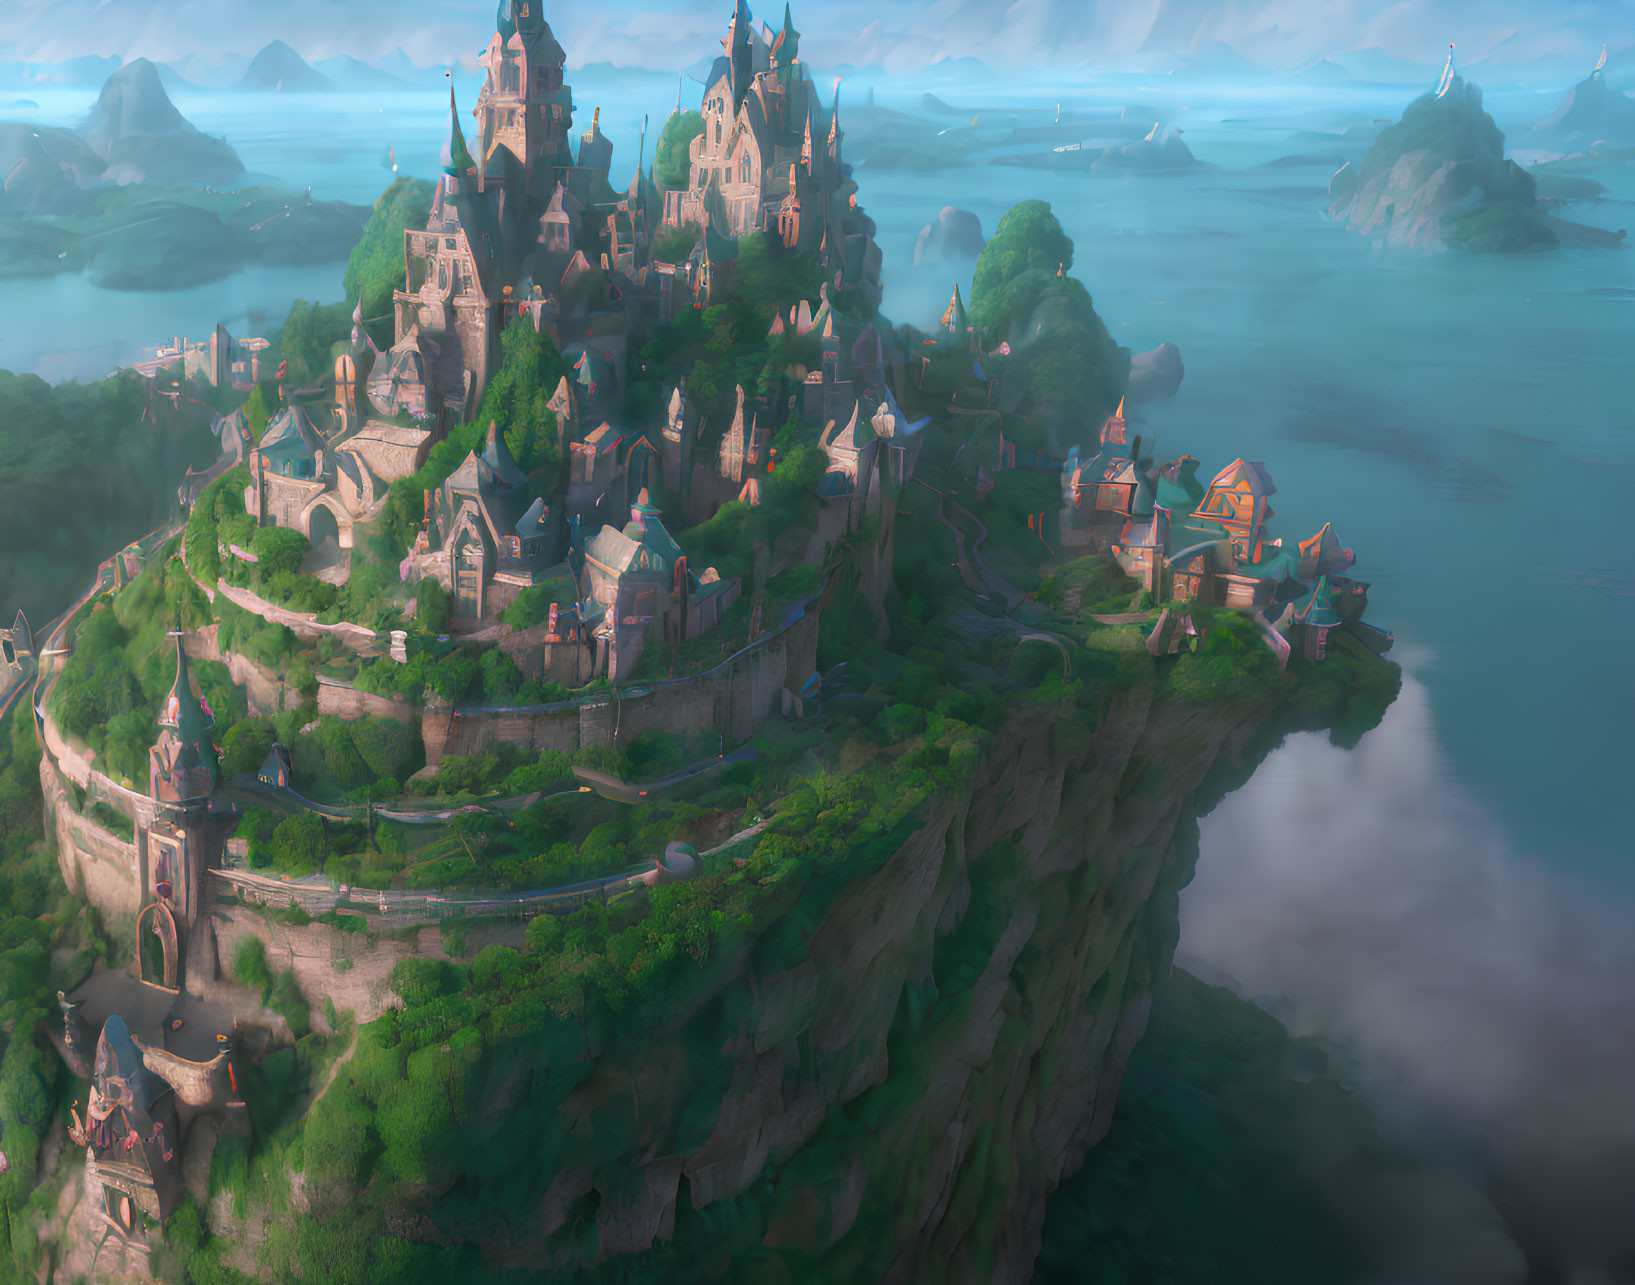 Fantasy castle on cliff overlooking river with surrounding buildings and misty mountains